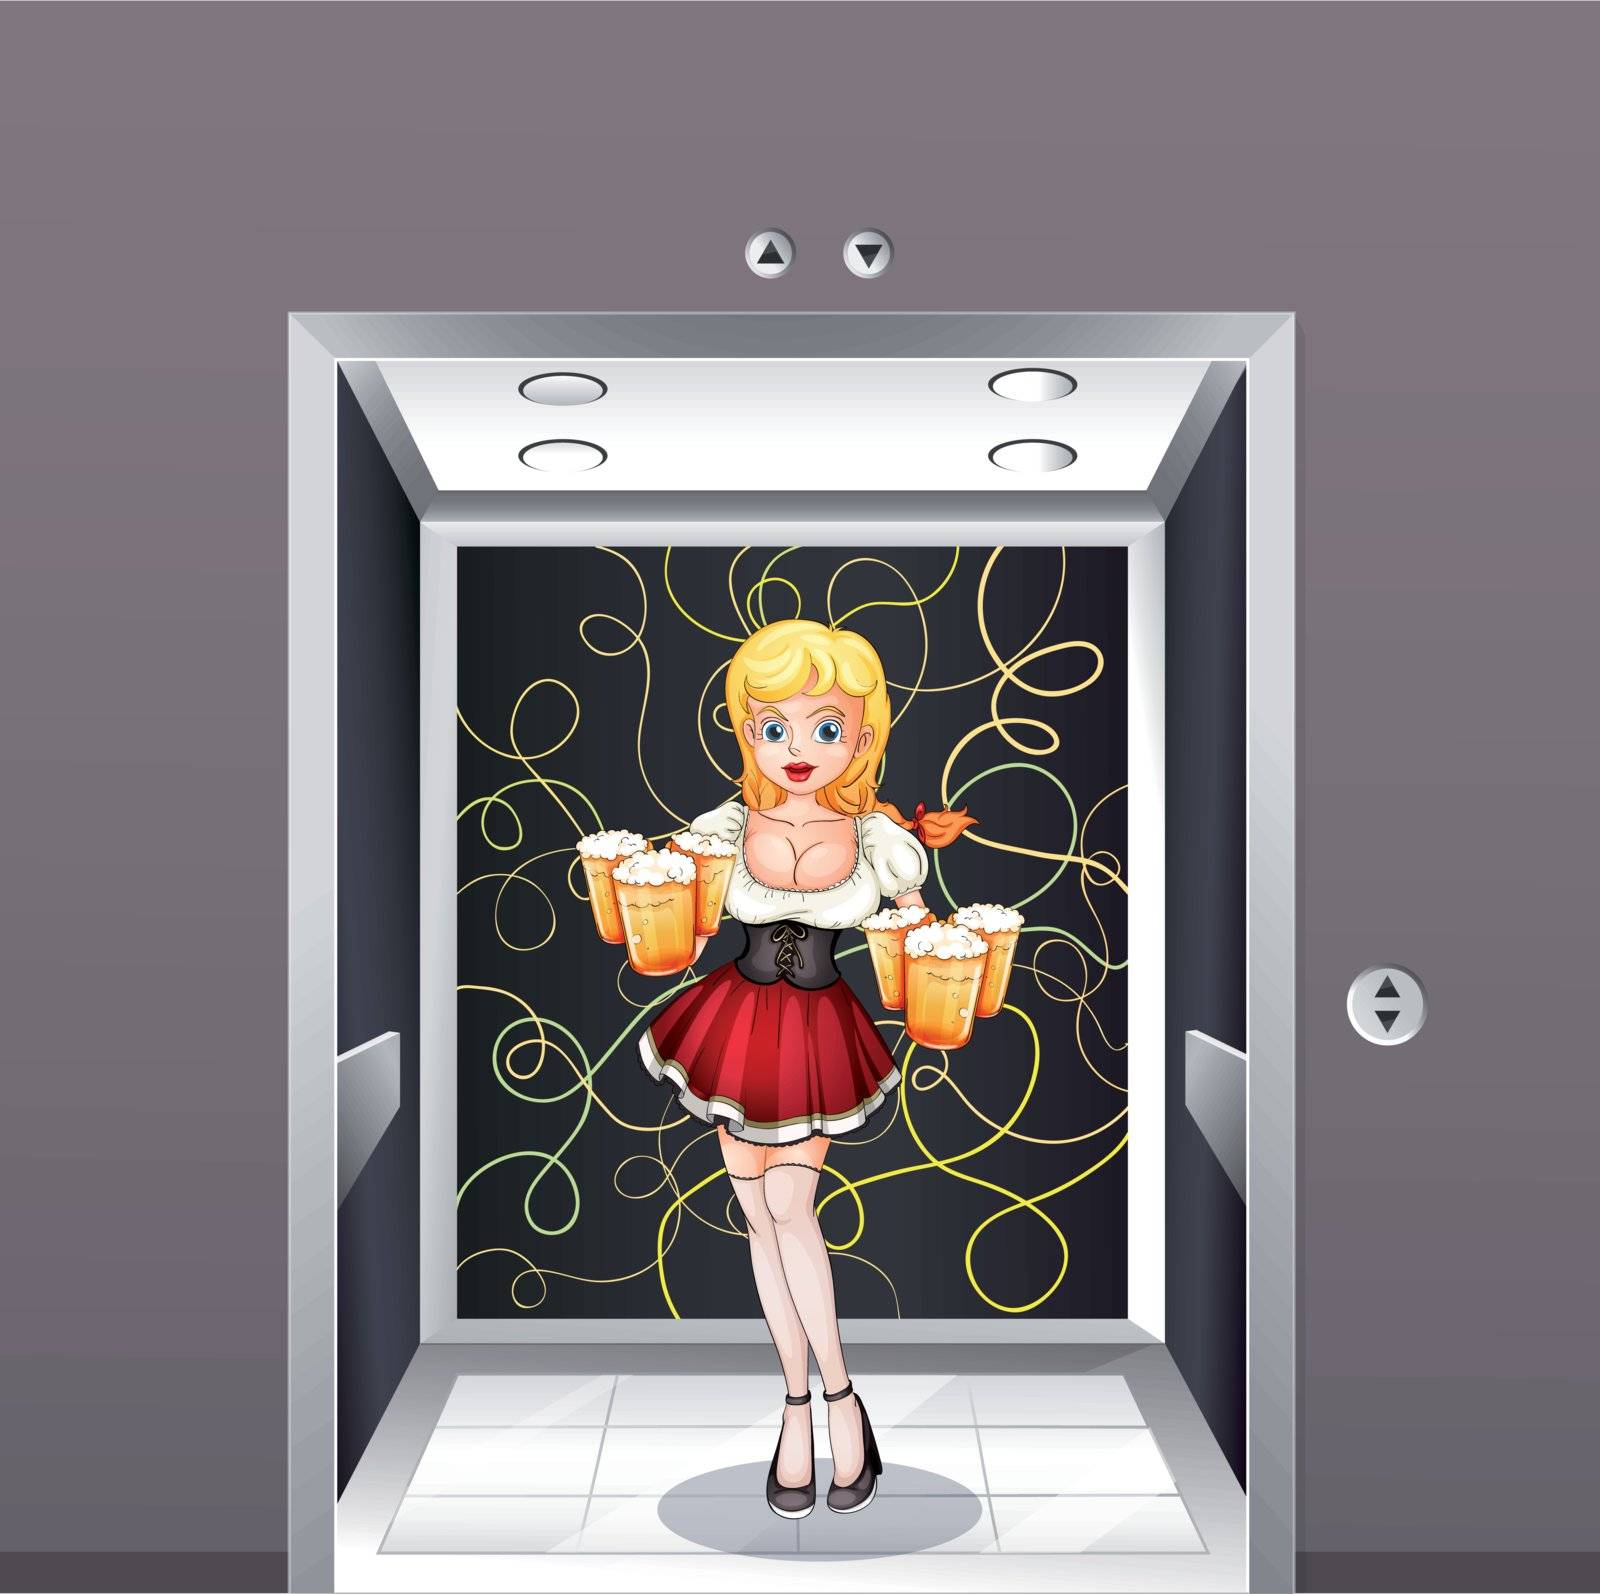 Illustration of a waitress at the elevator